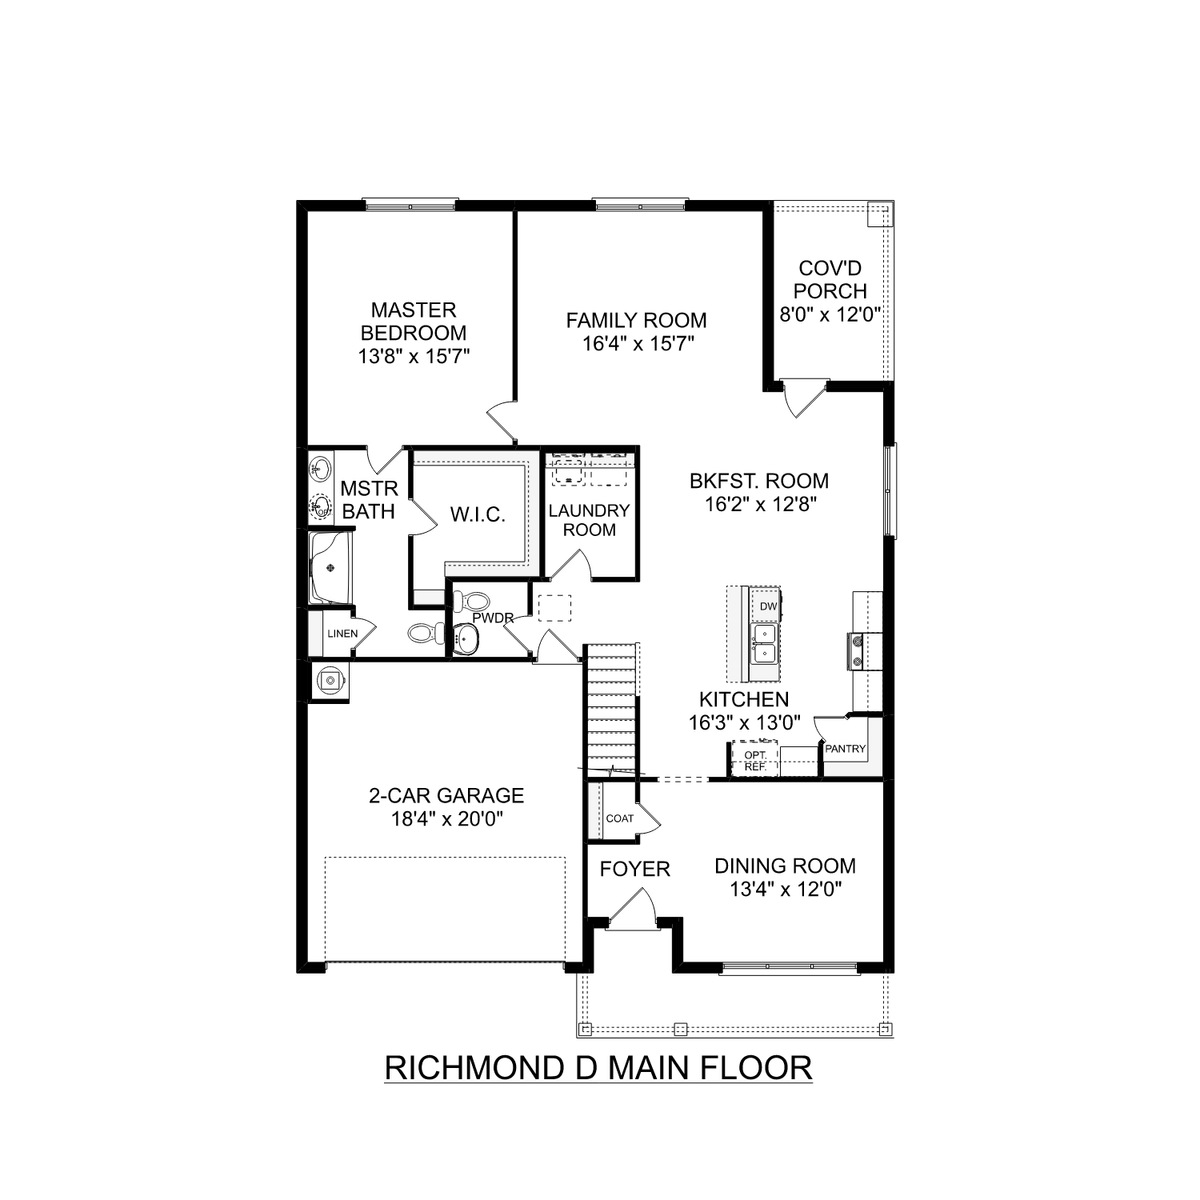 1 - The Richmond D buildable floor plan layout in Davidson Homes' Old Stone community.